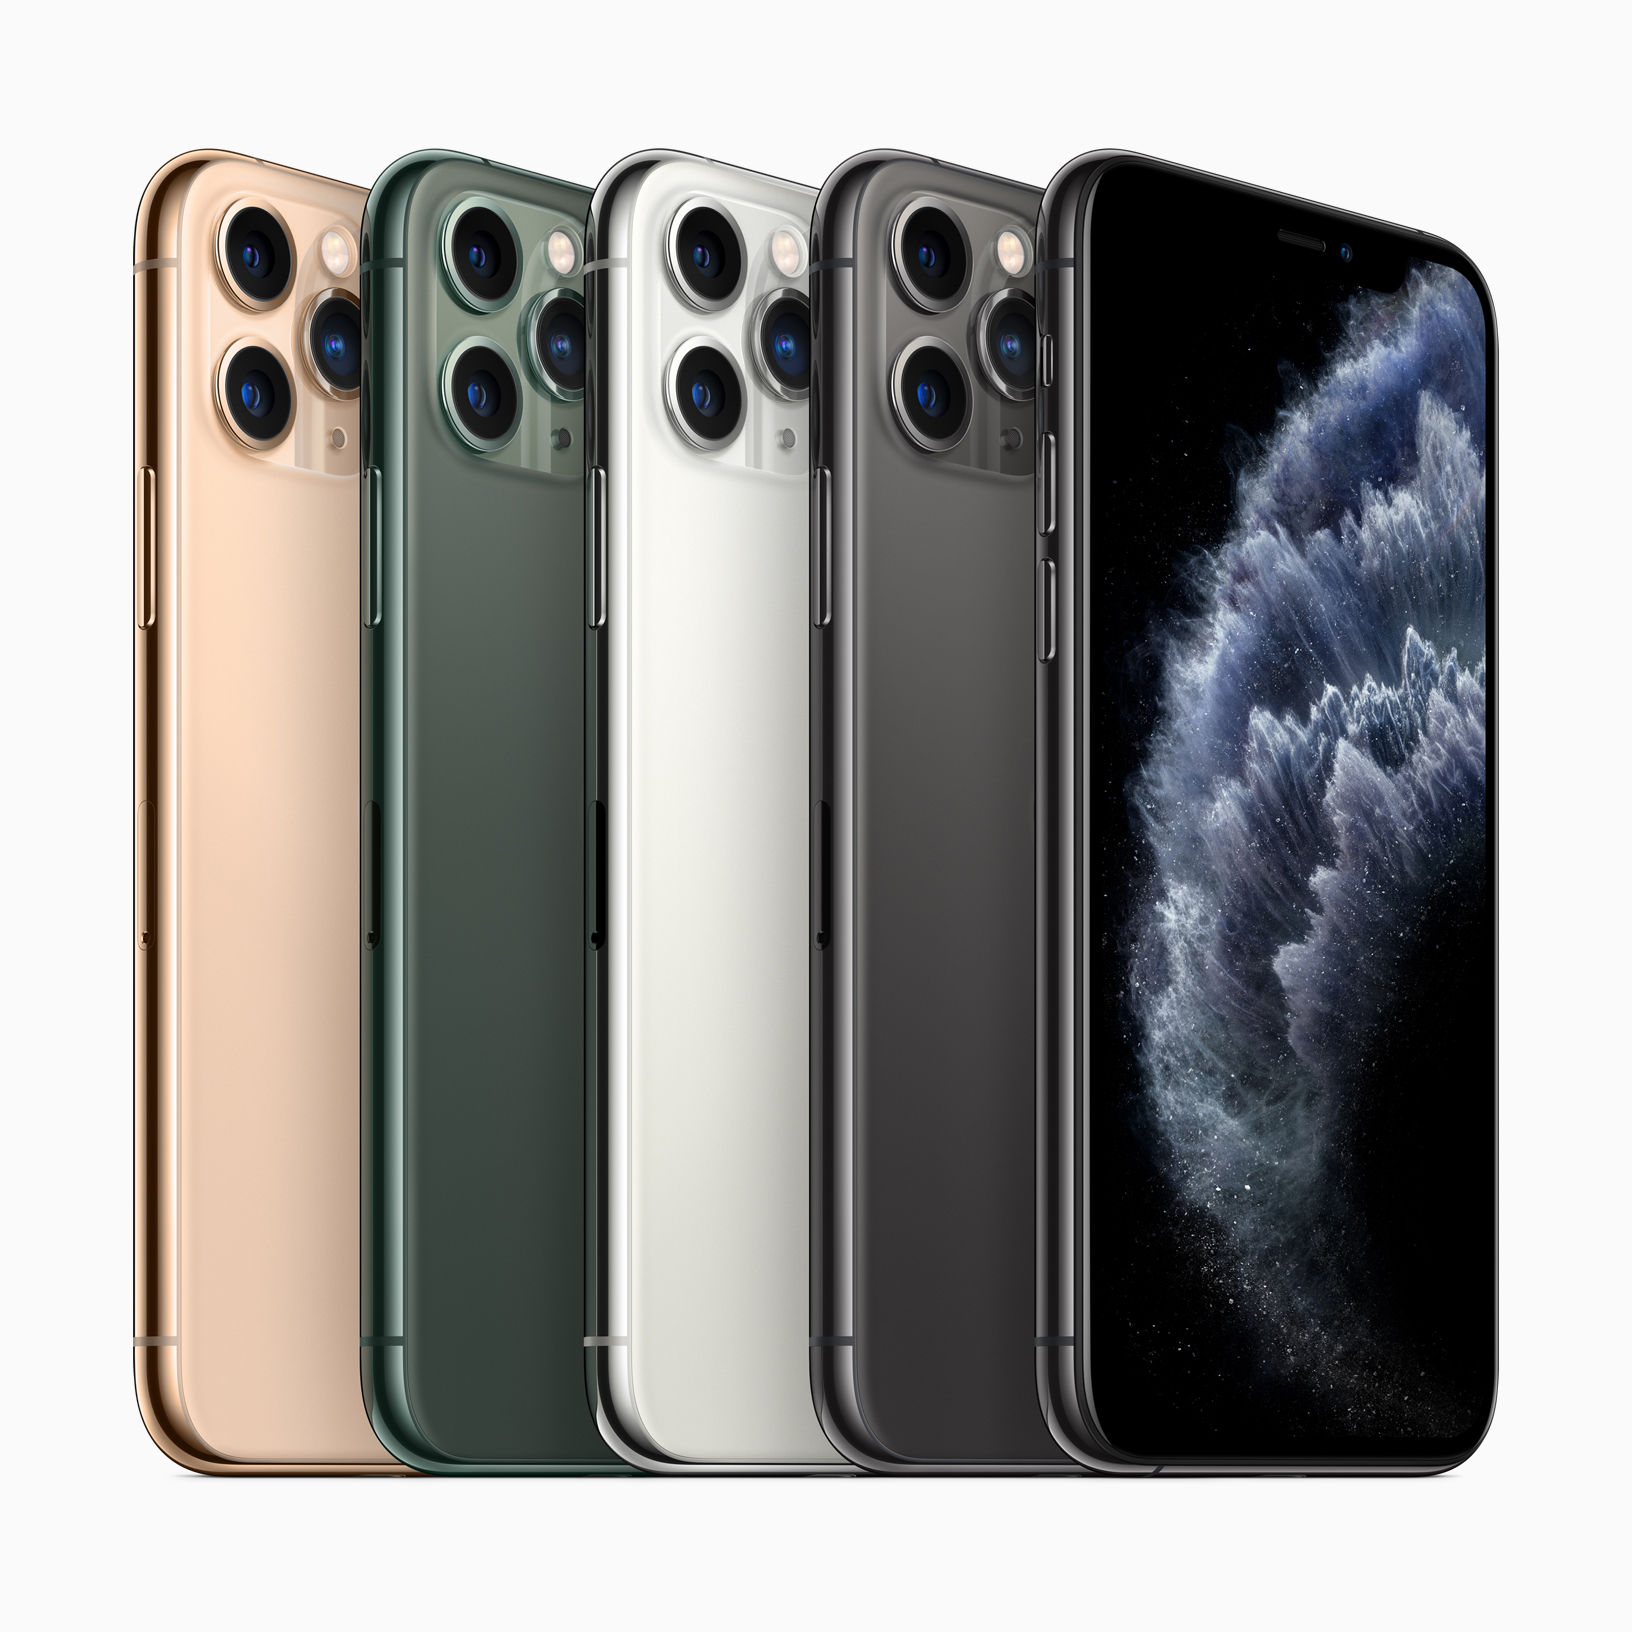 From right: gold, midnight green, silver, and space gray iPhone 11 Pro. Images via Apple